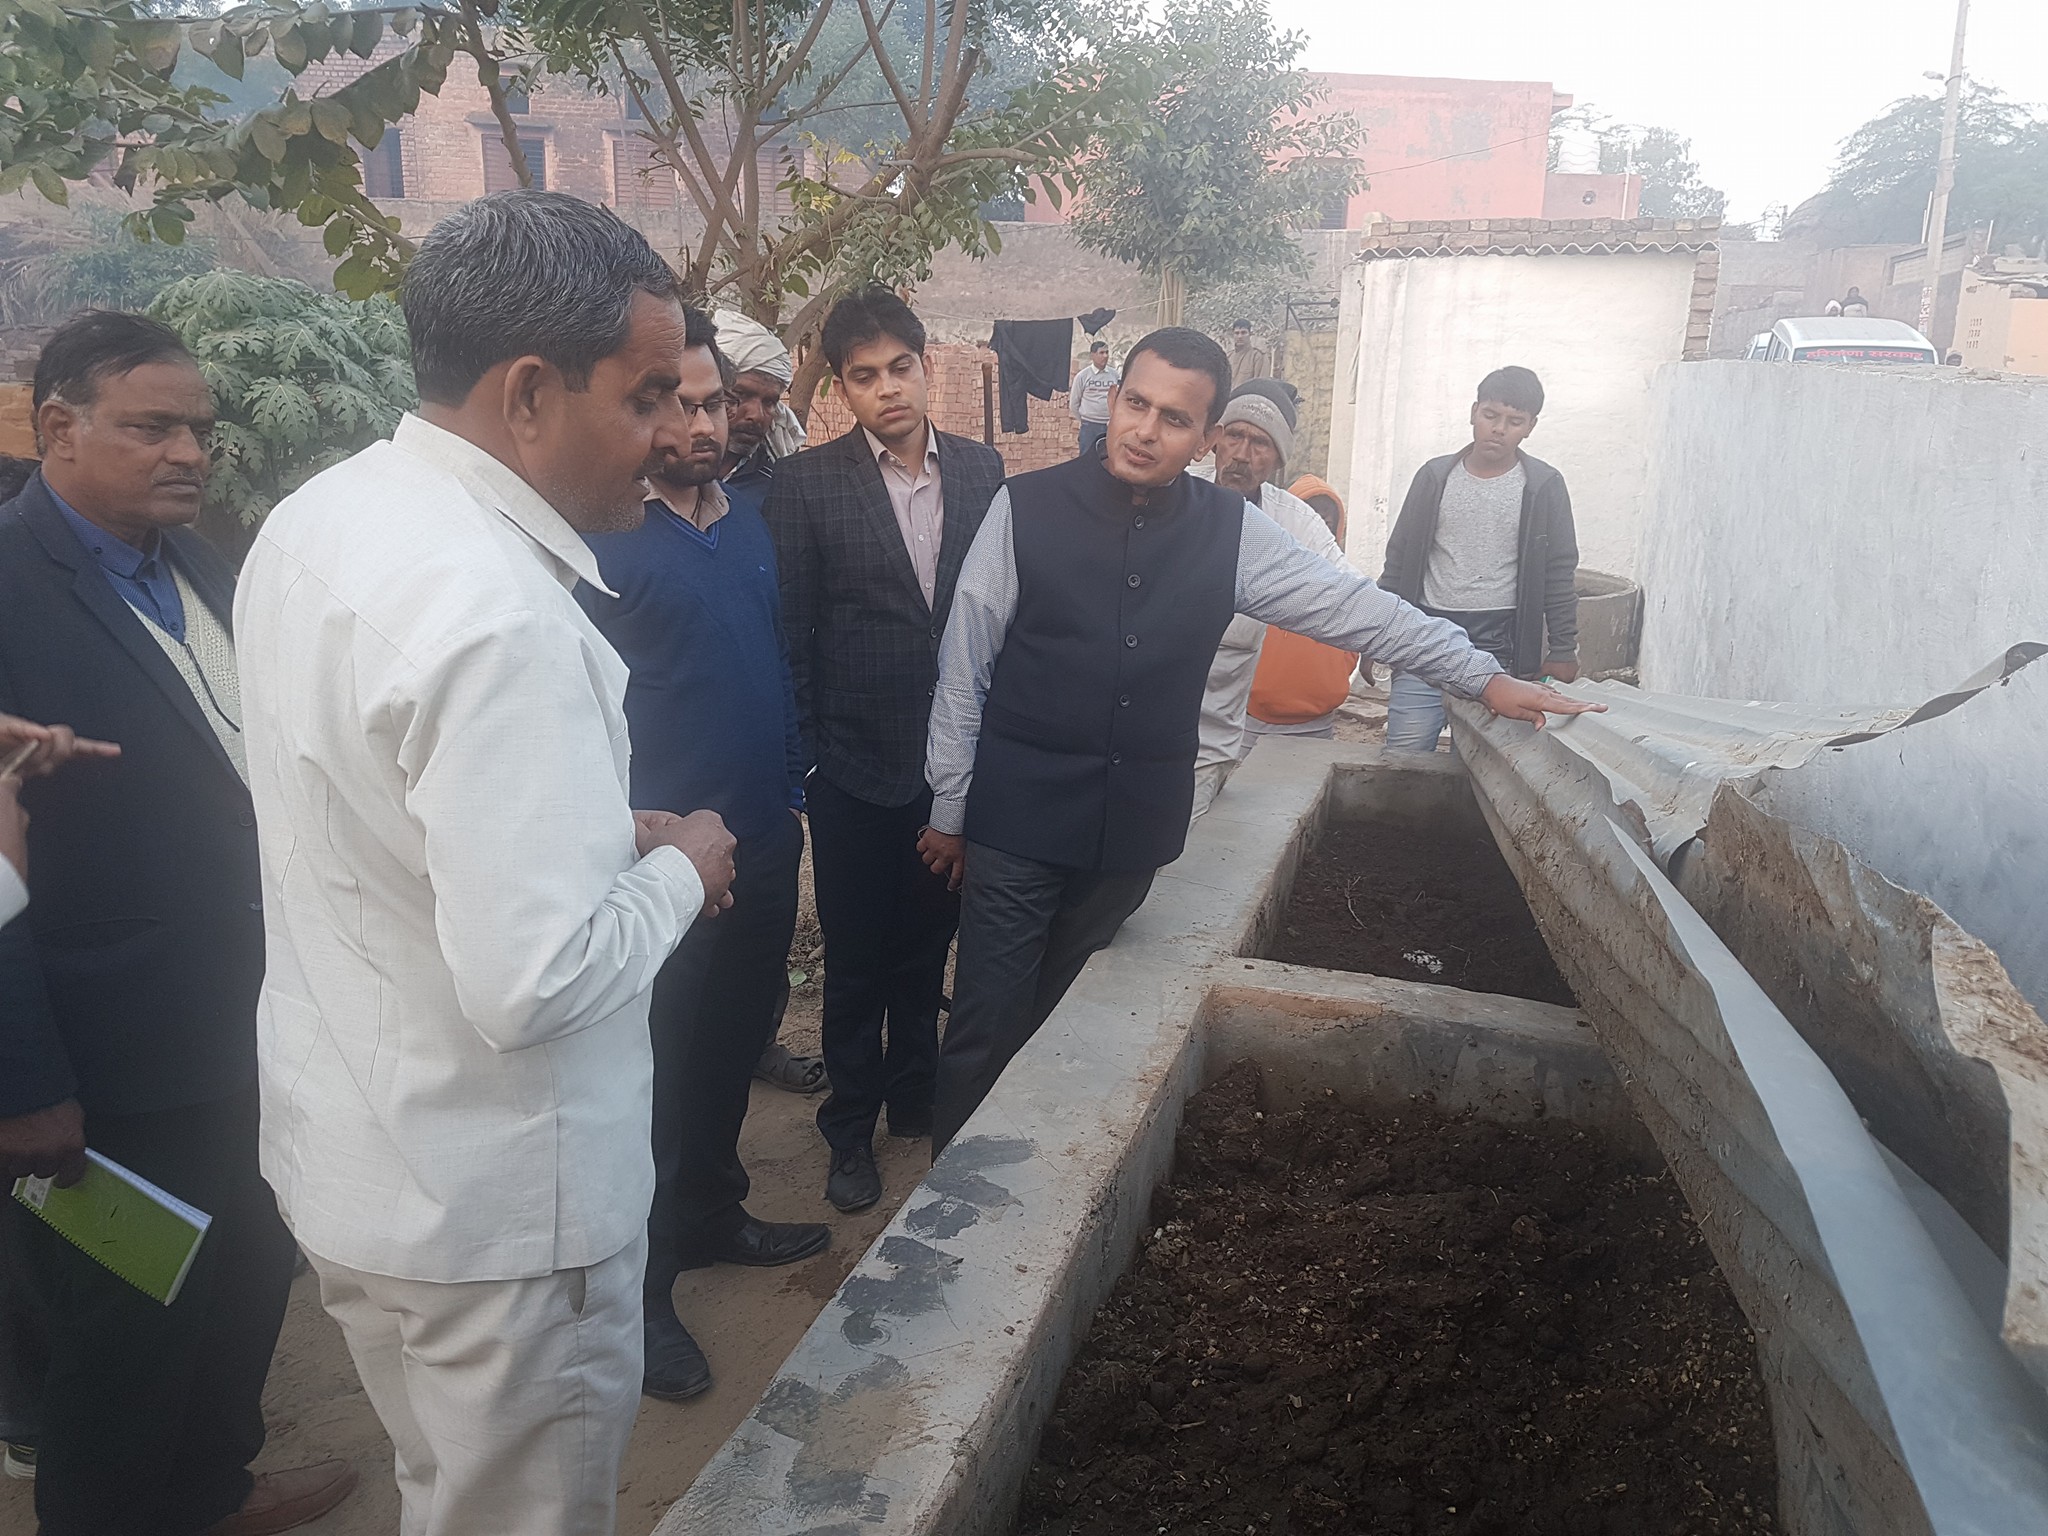 Dy Commissioner Maniram Sharma on a visit to Paroli. The village generated very high points by demonstrating improvements in its soak pit coverage and vermicompost facilities. (Pic courtesy: Abhinav Vats)